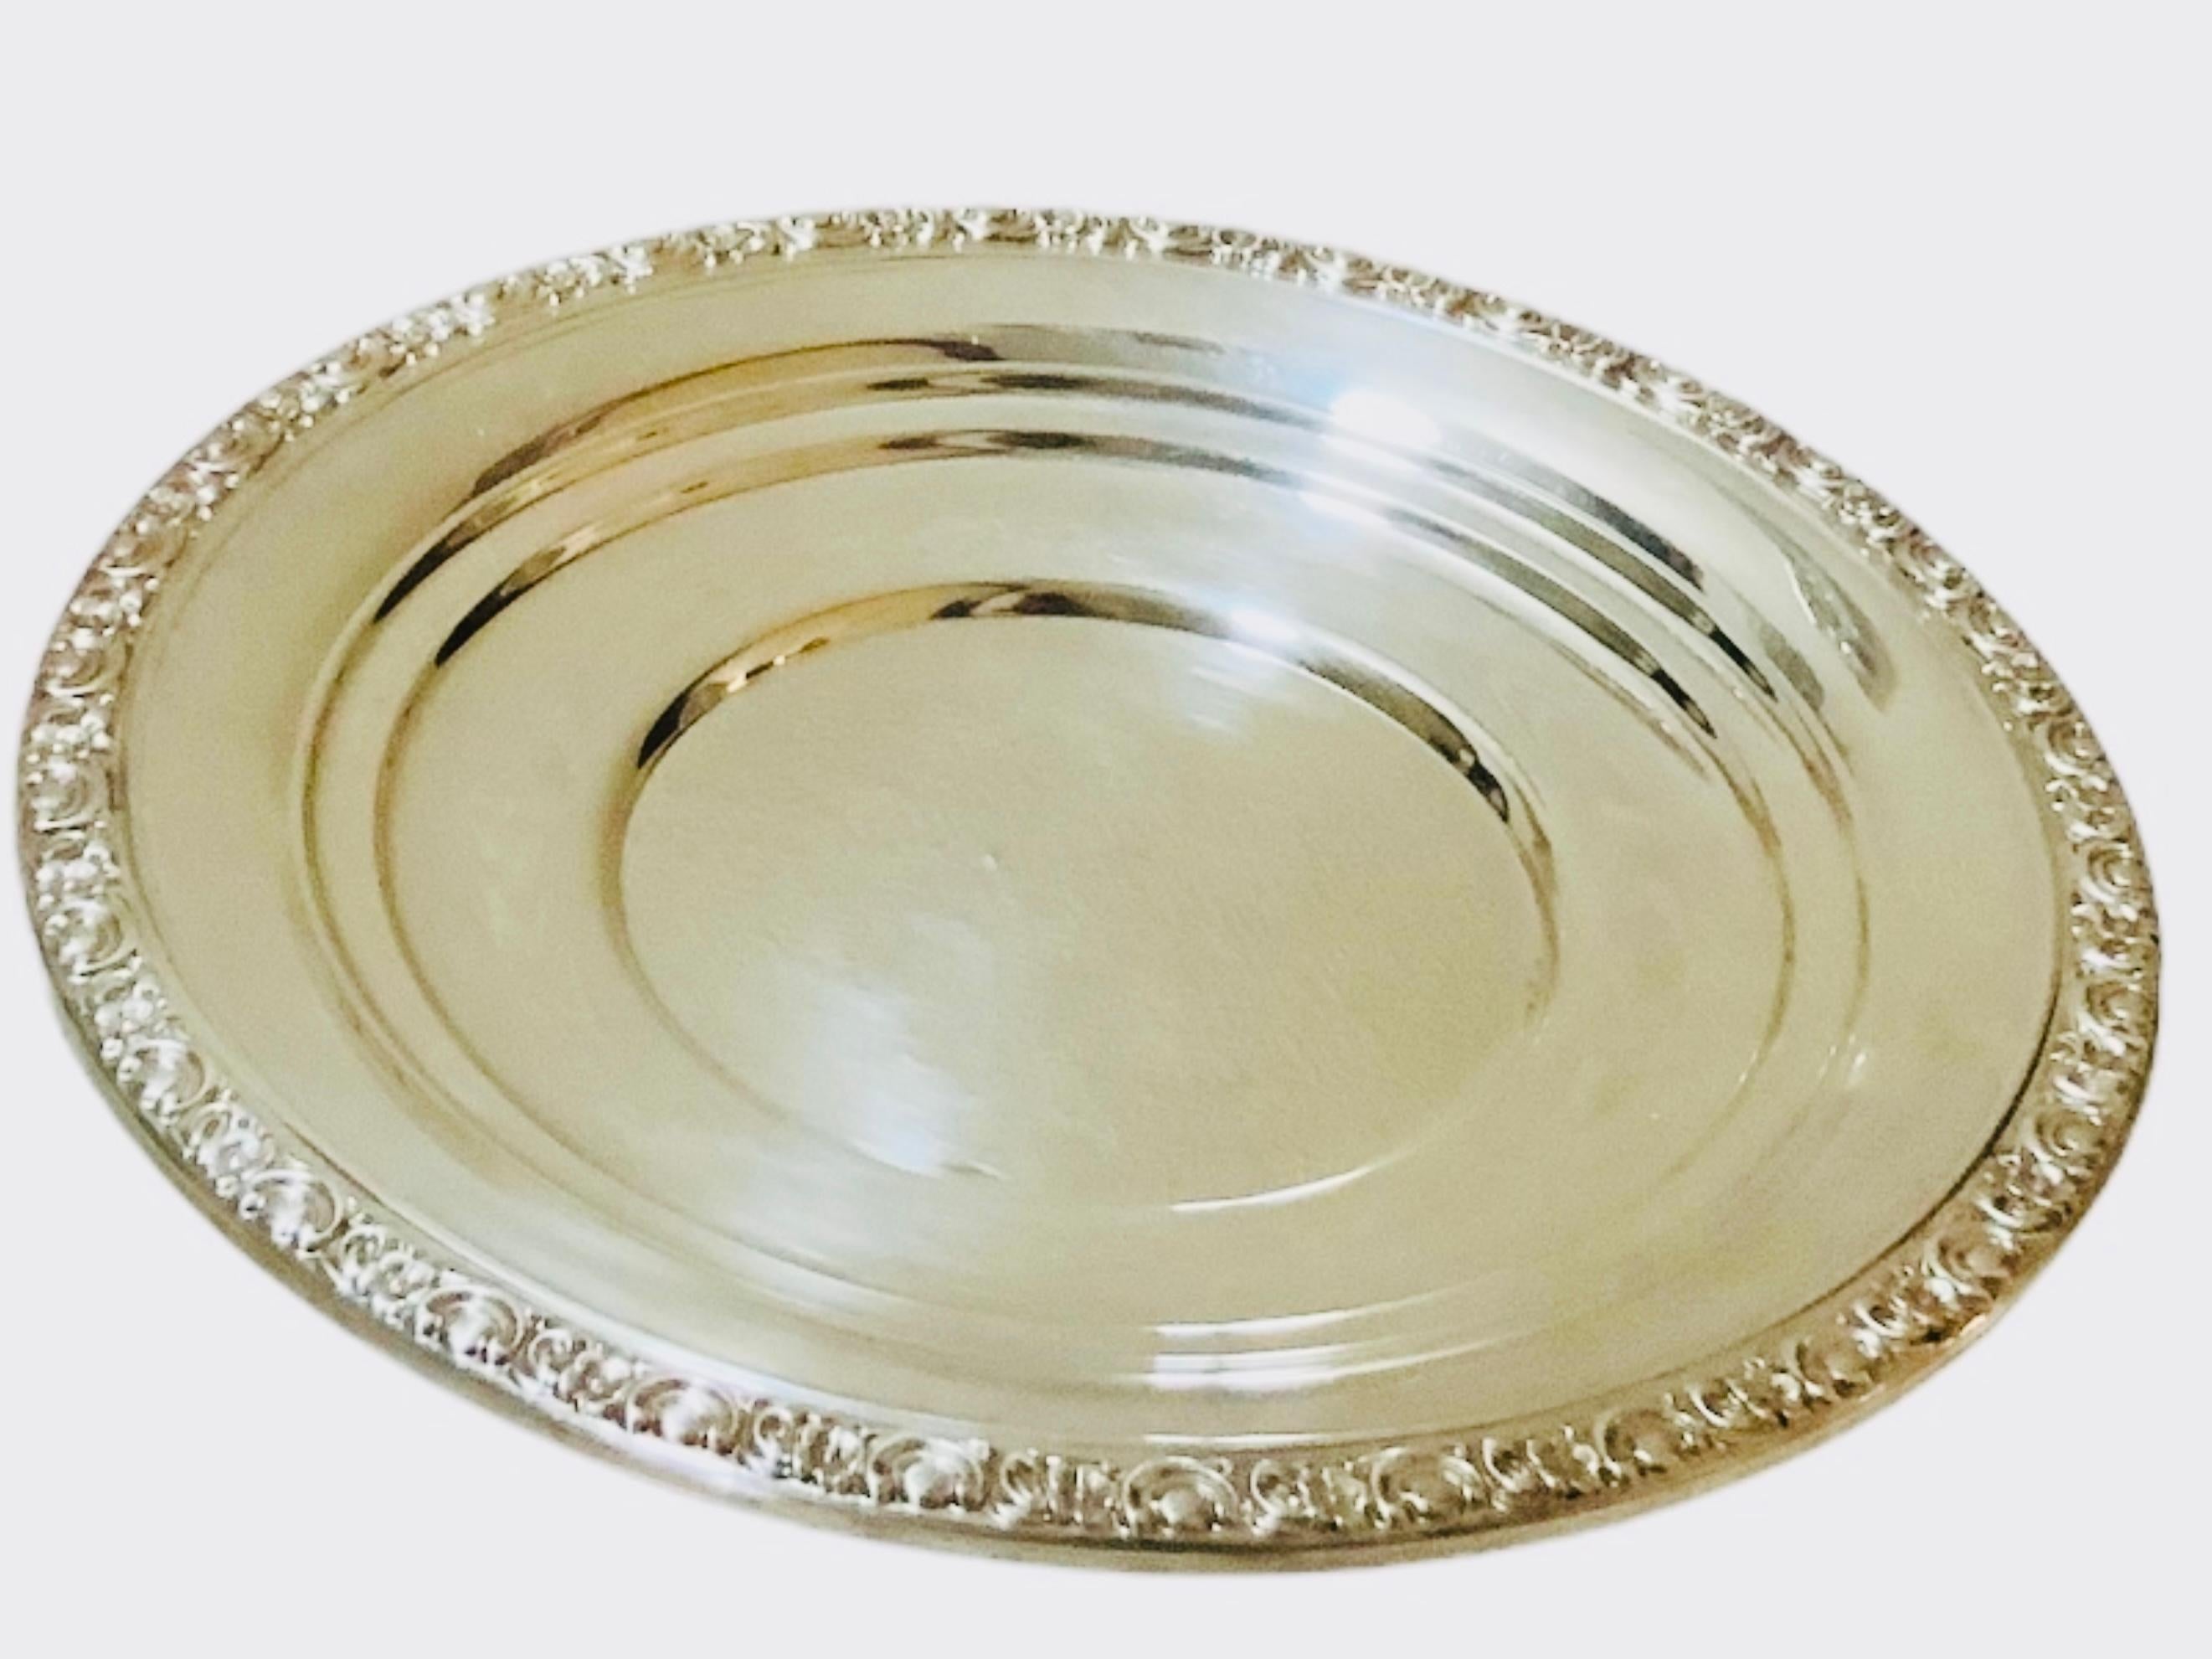 Newport Sterling Silver Round Plate In Good Condition For Sale In Guaynabo, PR